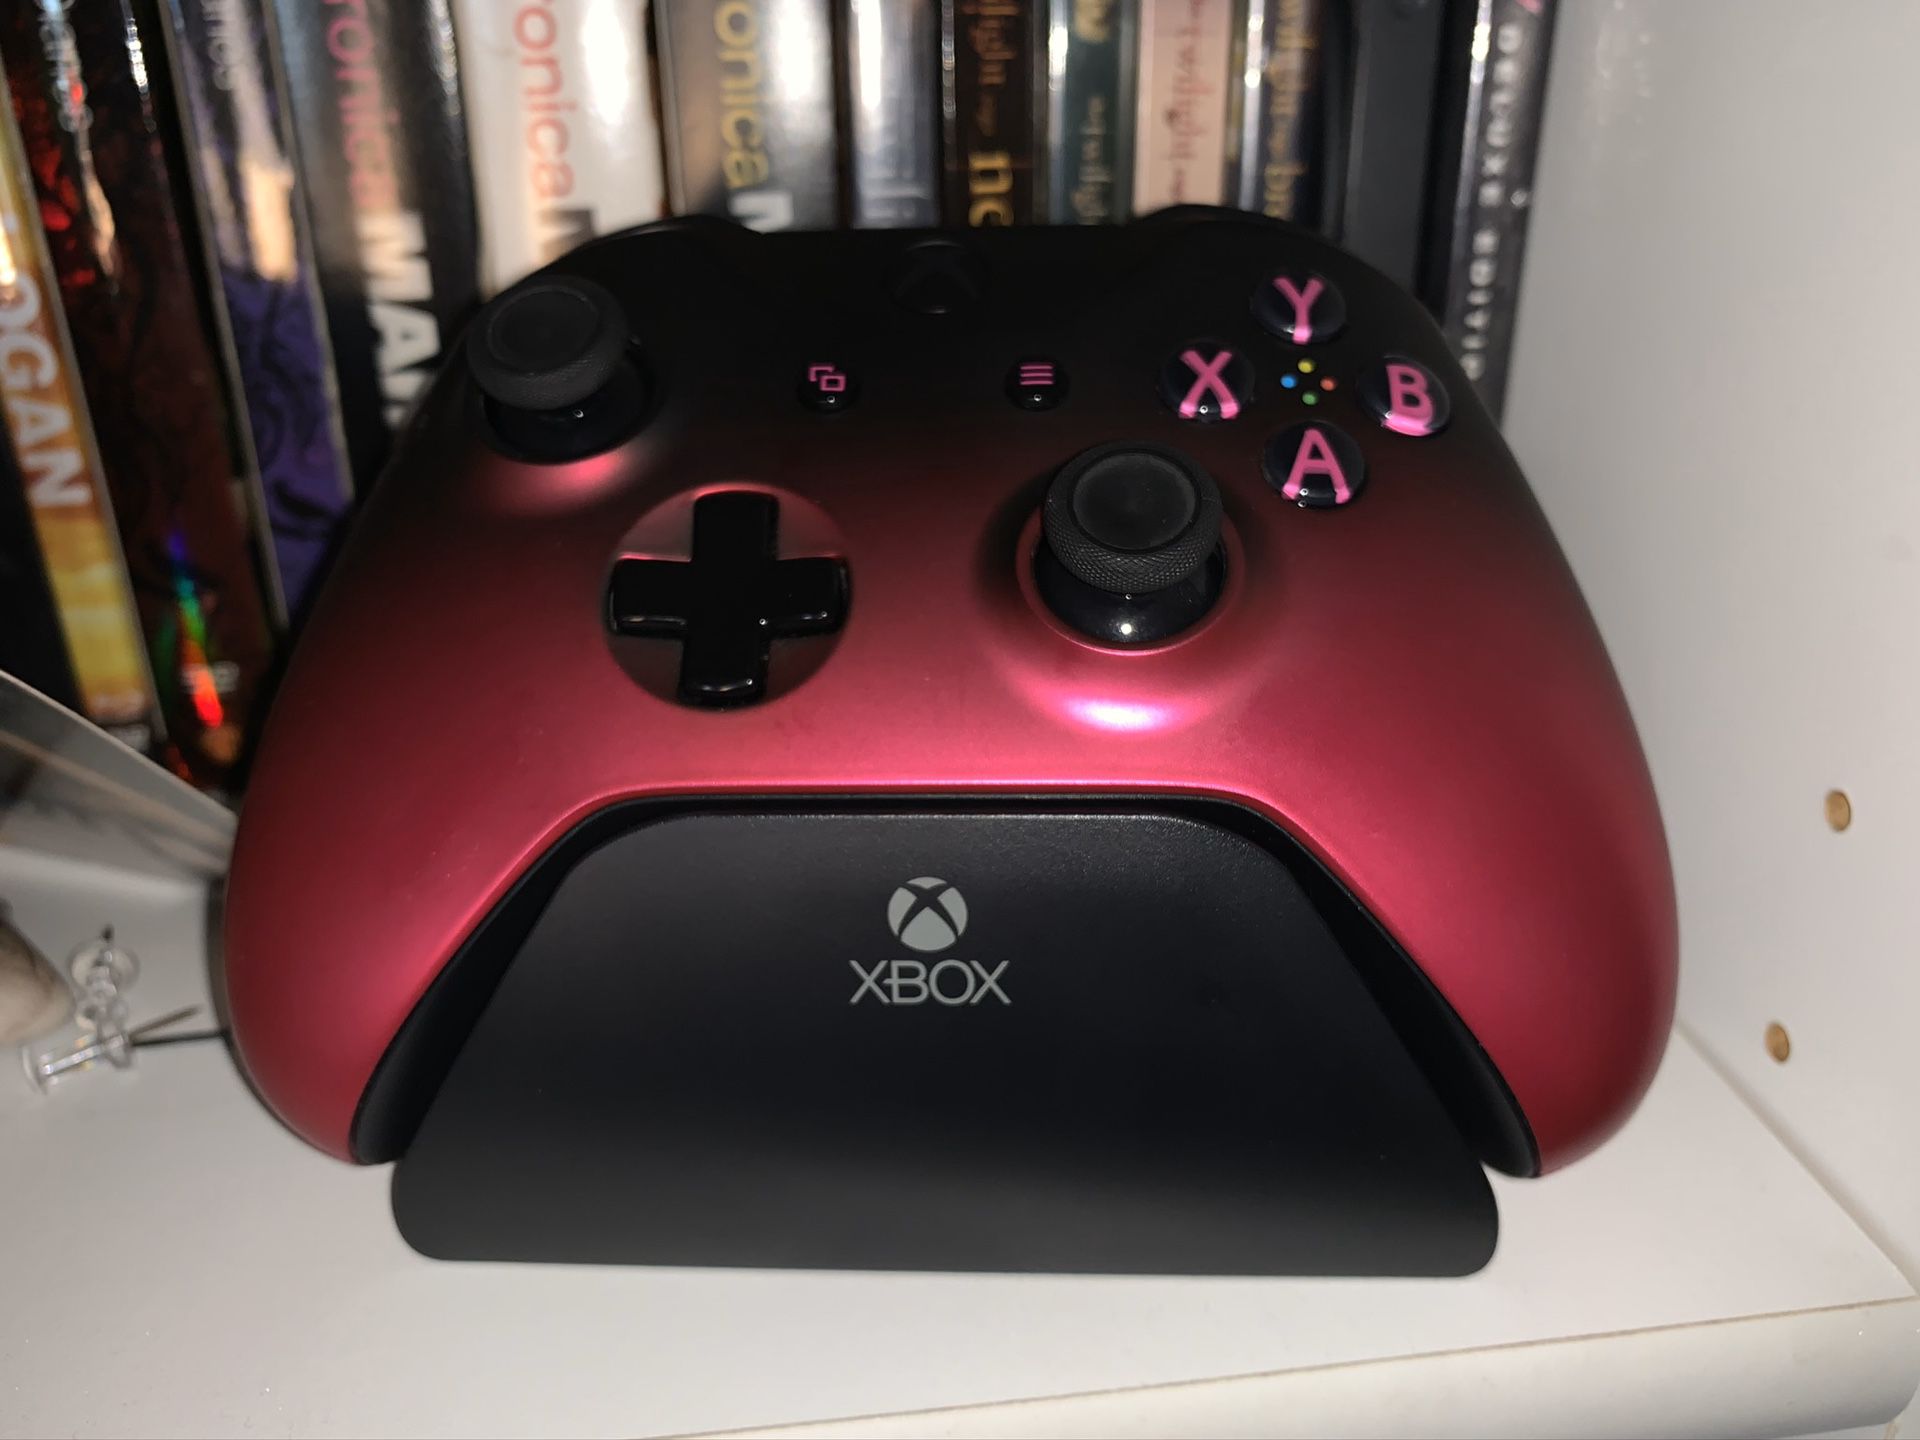 Xbox limited edition dawn shadow controller rechargeable battery pink black